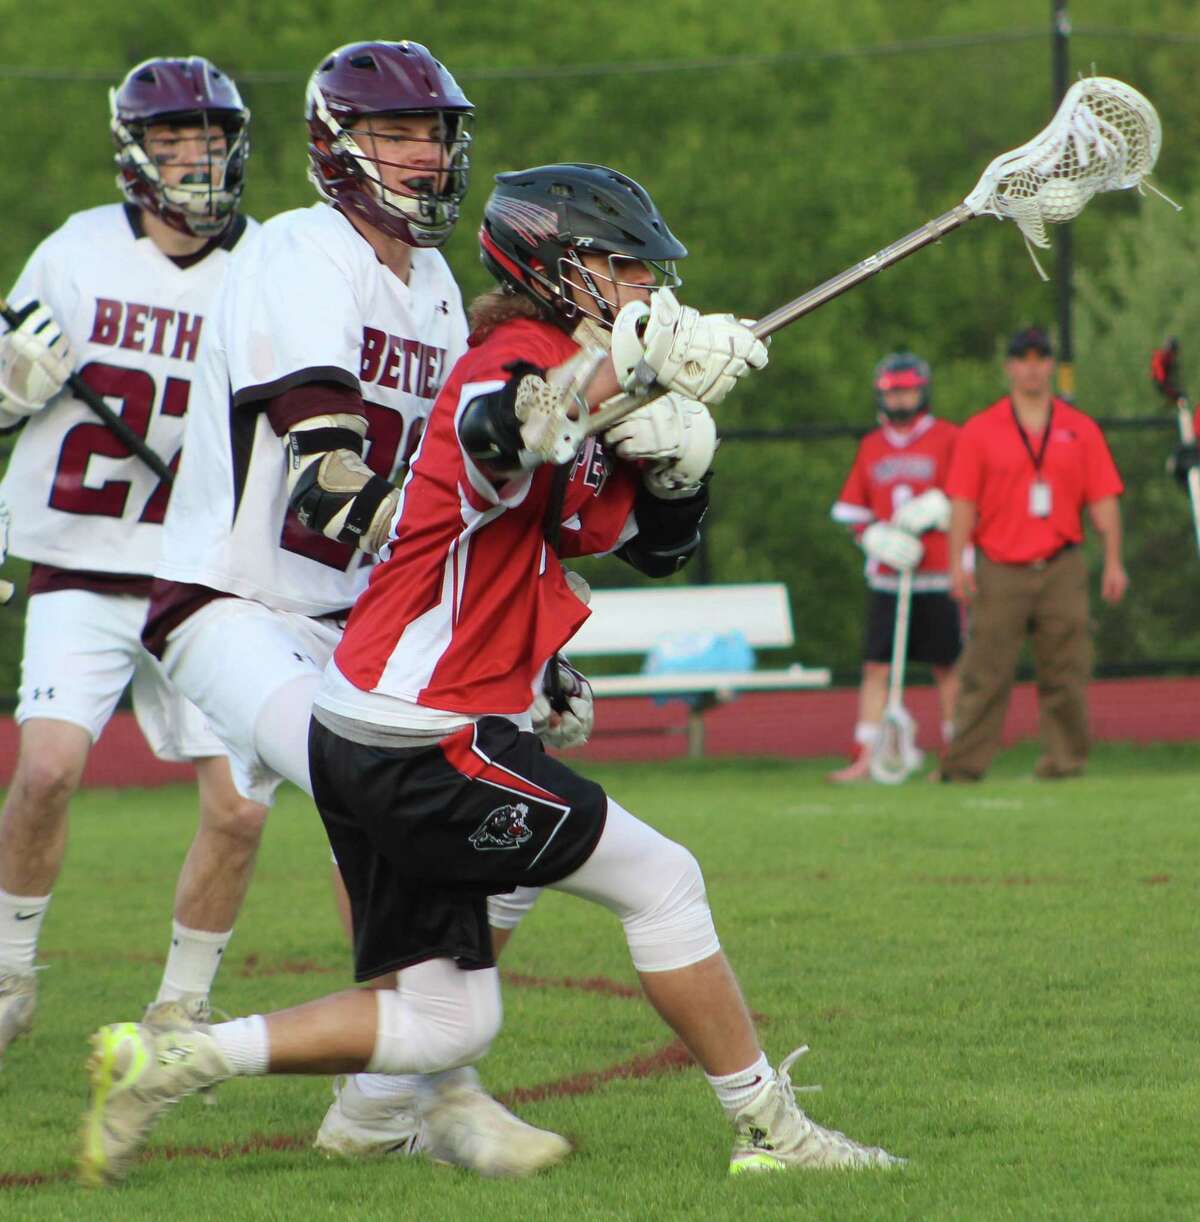 Pomperaug's Evan Cyganowski, right, looks for an opening as Bethel's Luke Newman, center, and Aiden Vizi defend during the boys lacrosse game at Bethel High School May 12, 2017.